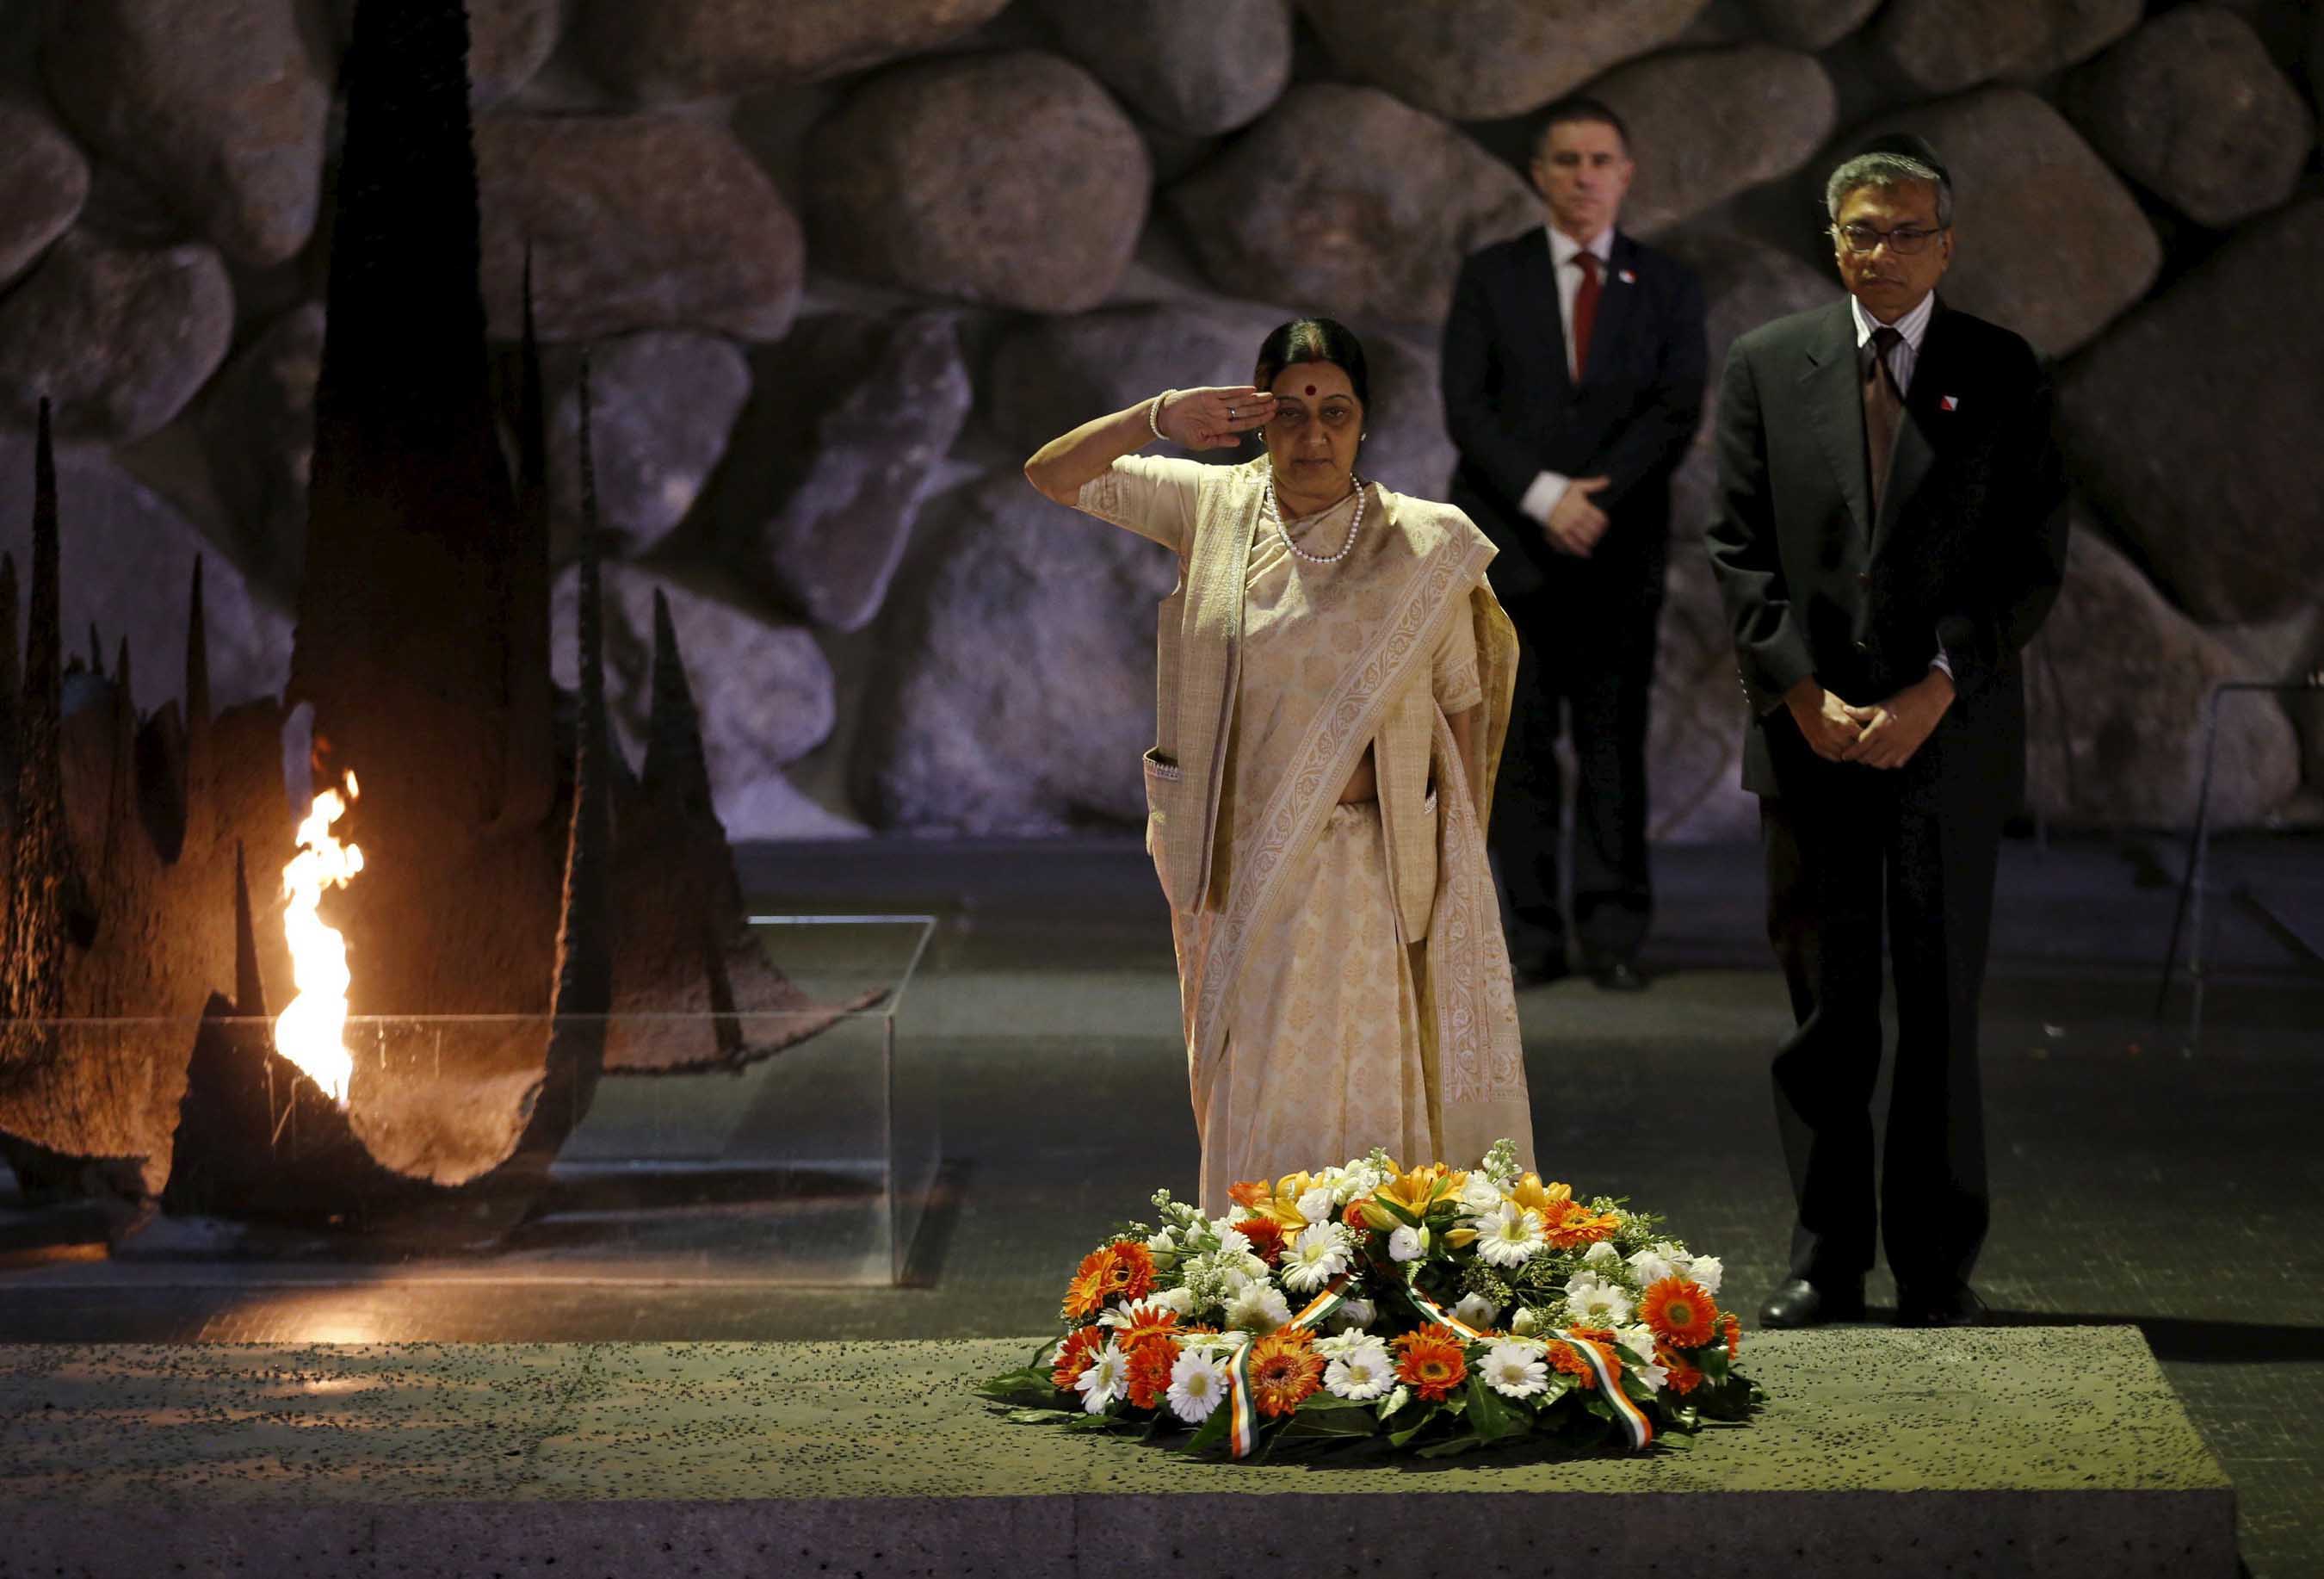 Indian Foreign Minister Sushma Swaraj observes a moment of silence after laying a wreath with Indian ambassador to Israel, Jaideep Sarkar , during a ceremony in the Hall of Remembrance at Yad Vashem Holocaust Memorial in Jerusalem January 18, 2016. (UNI)